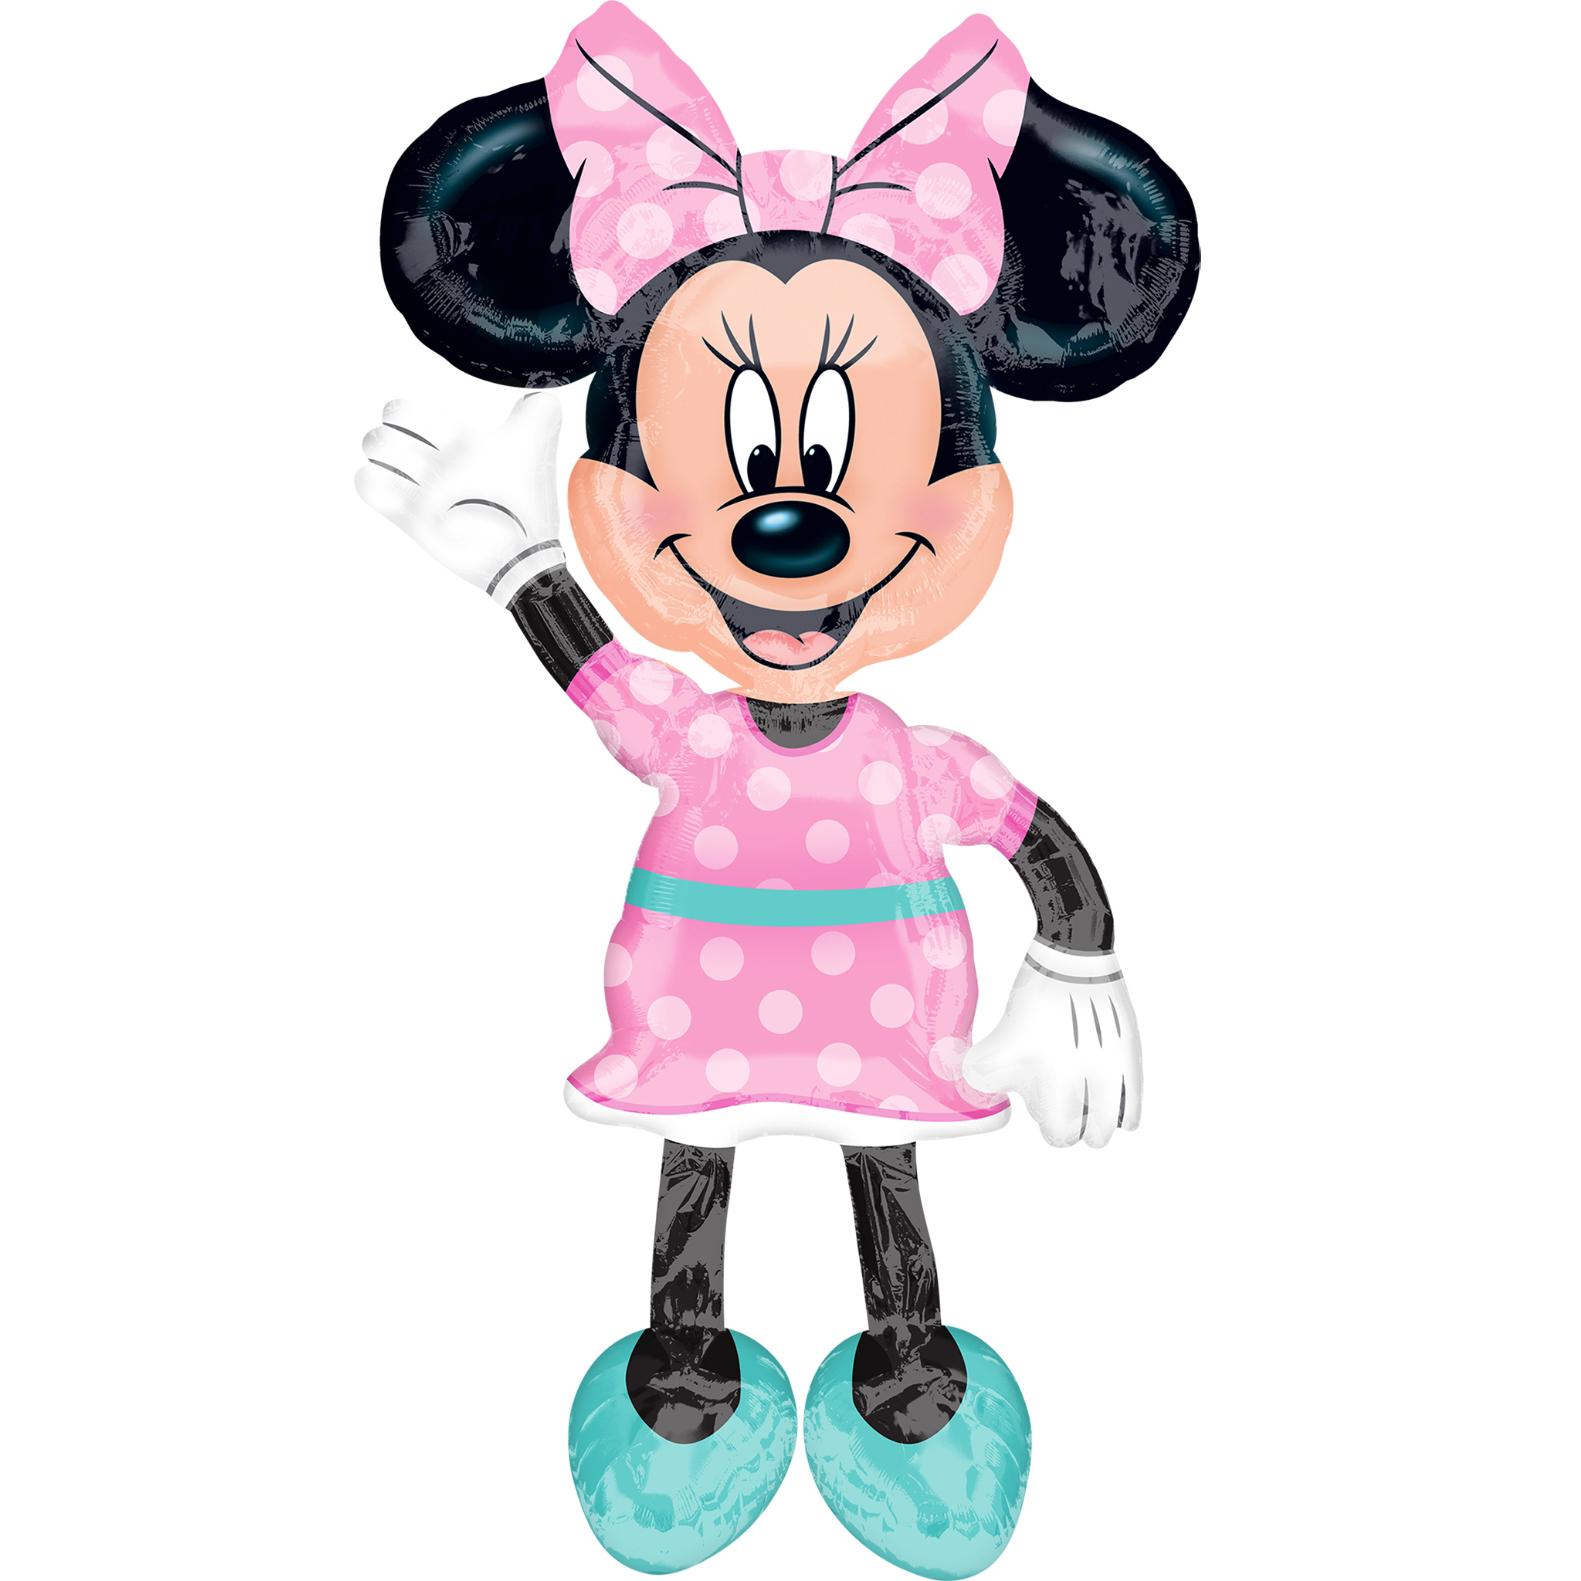 Minnie Mouse Airwalker Balloon 38x54in Balloons & Streamers - Party Centre